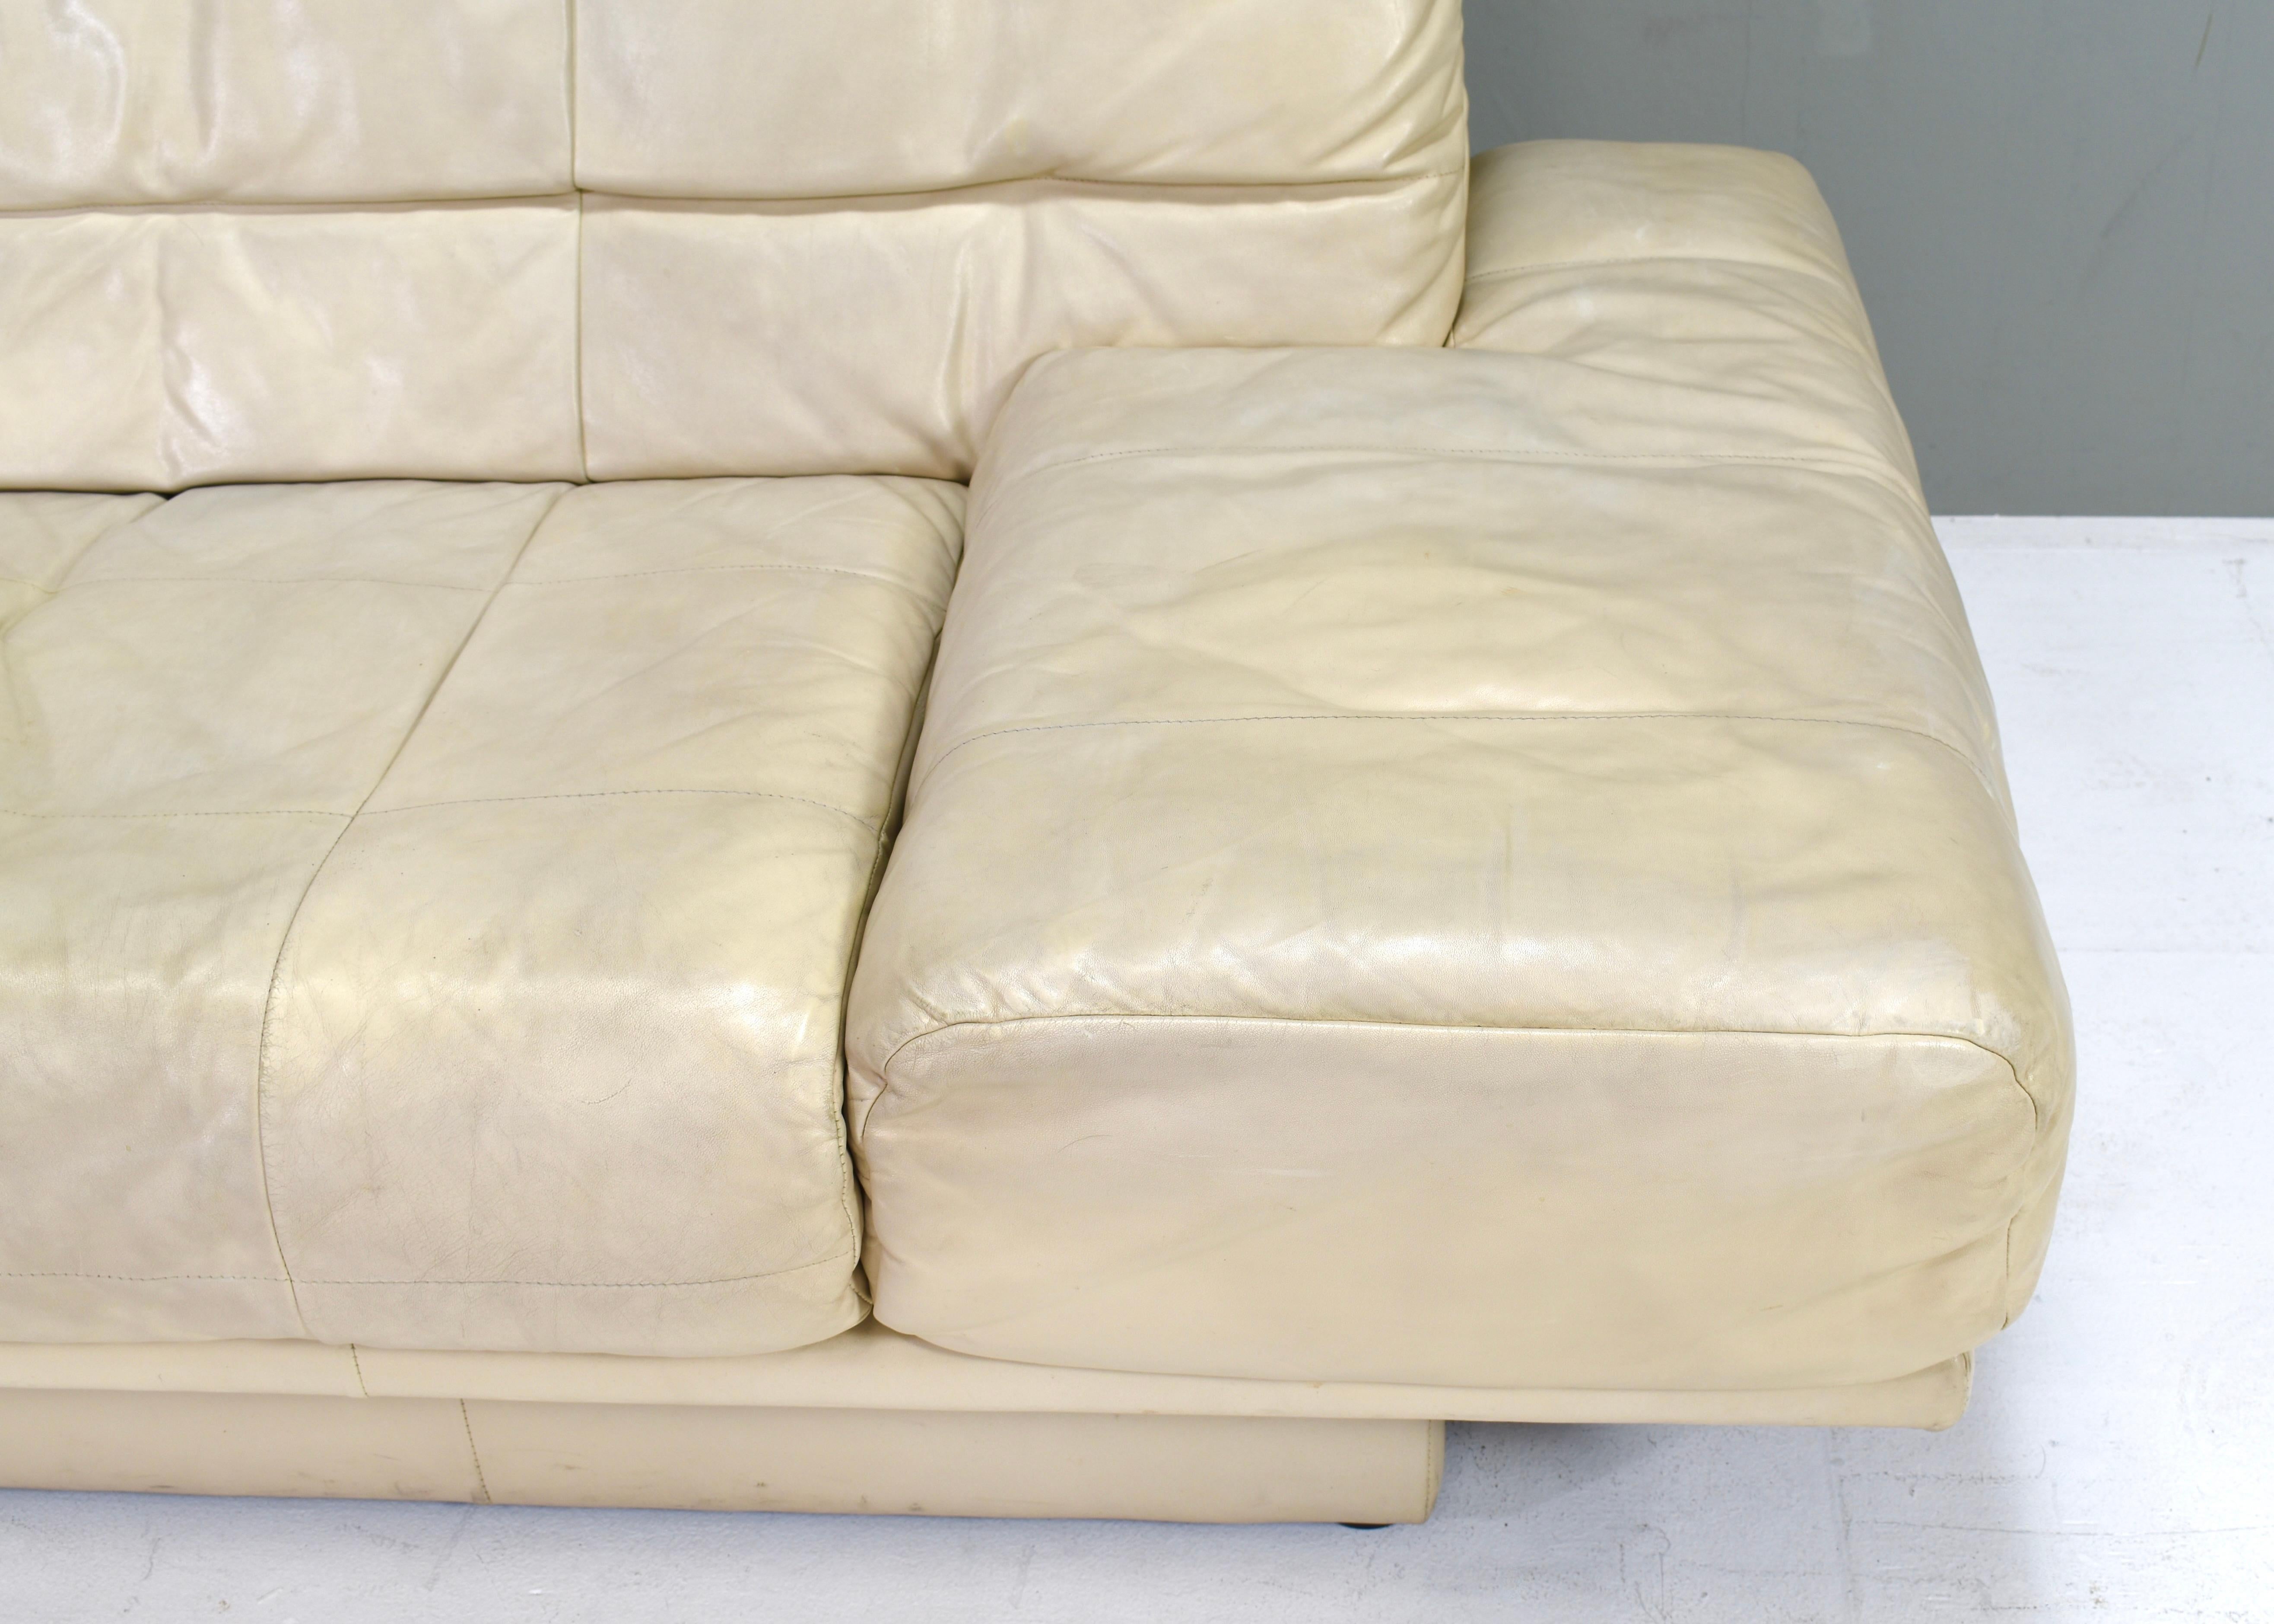 Rolf Benz 2-seat sofa in Ivory Cream White Leather – Germany, circa 1980-1990 For Sale 8